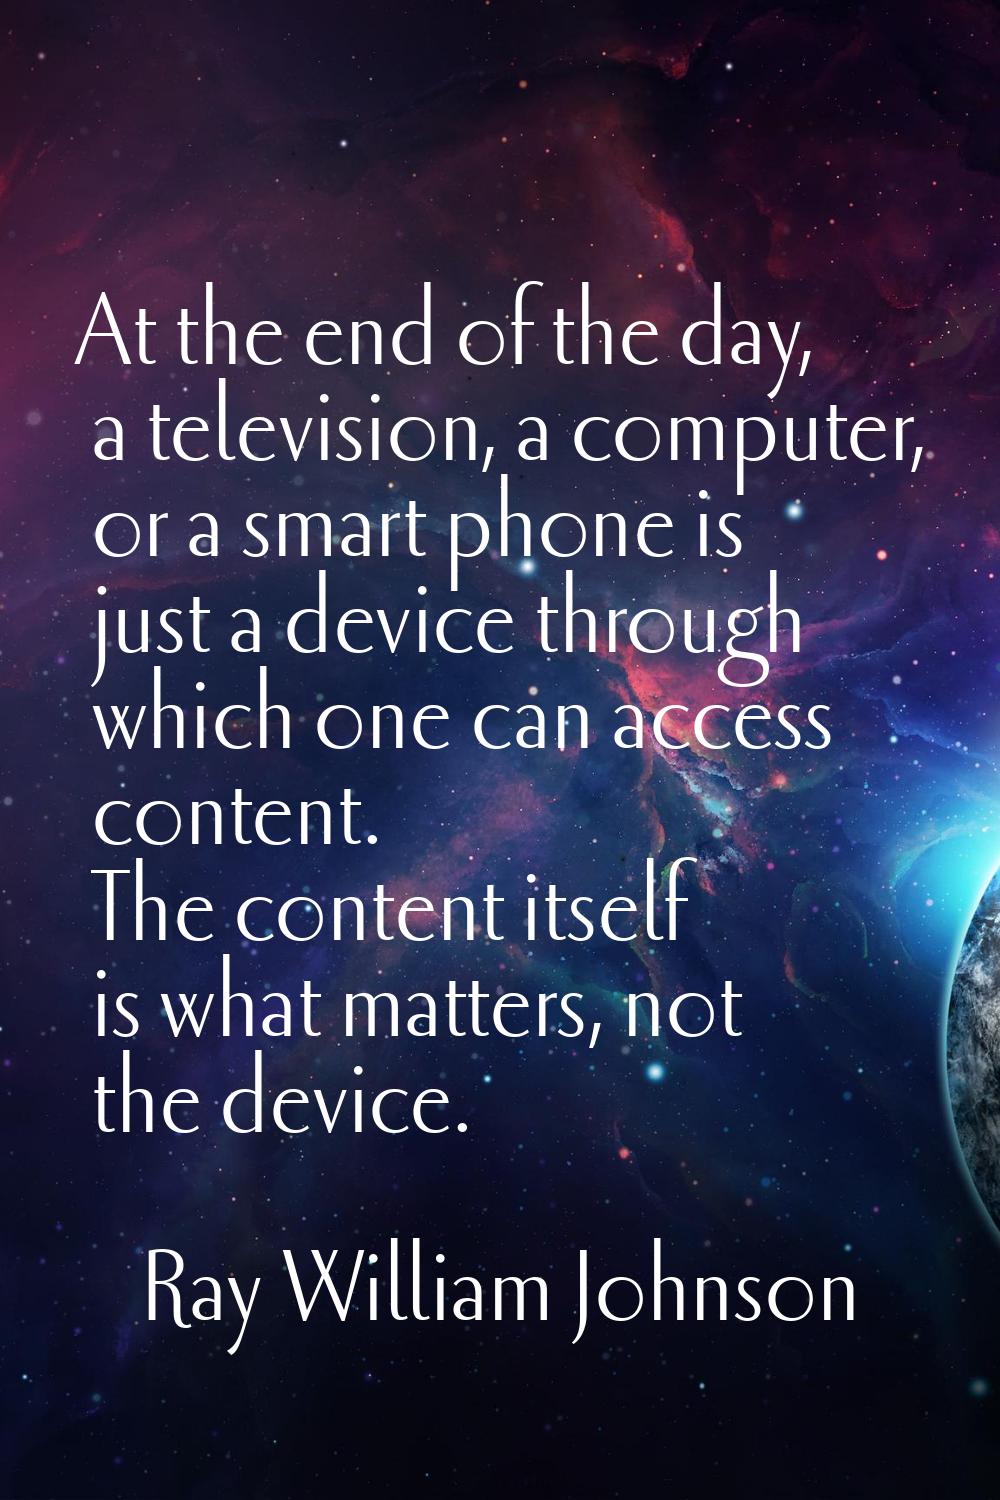 At the end of the day, a television, a computer, or a smart phone is just a device through which on